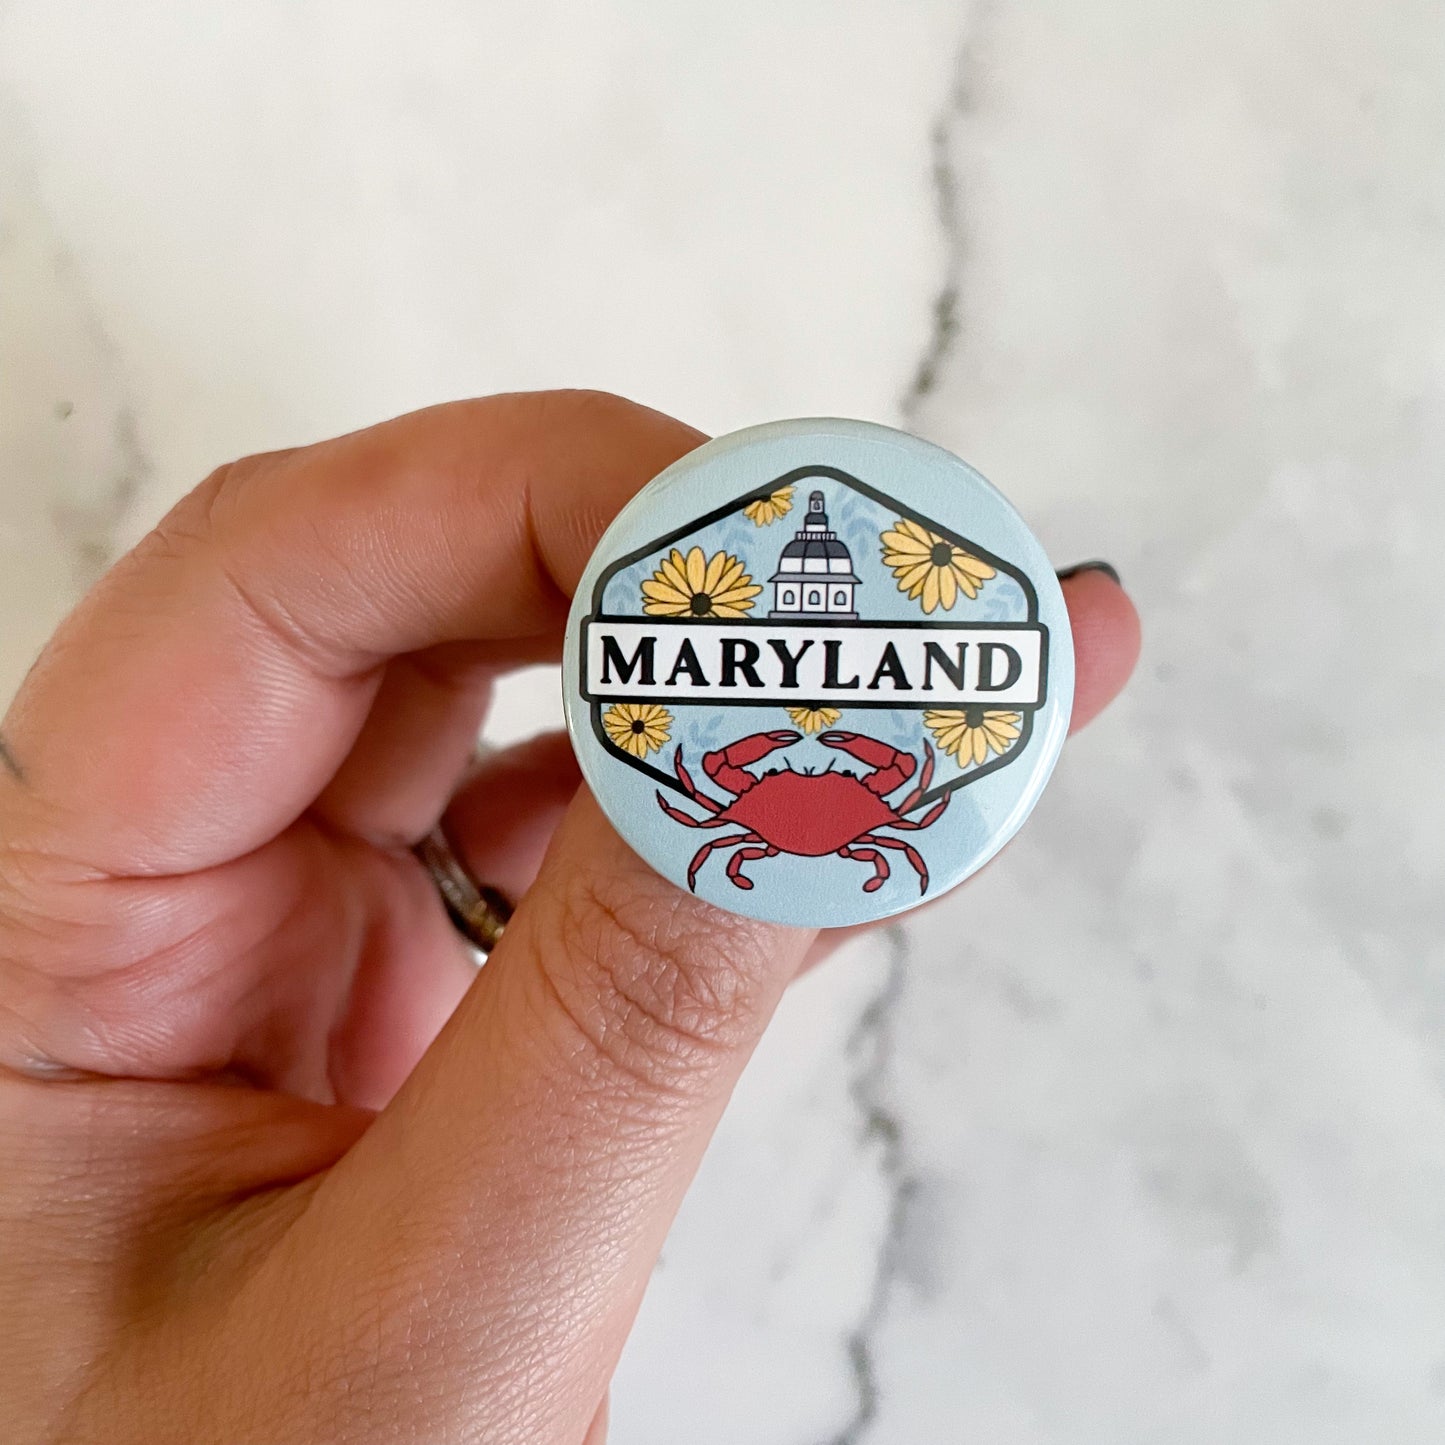 Maryland State Capital Button / Badge (Buy 4 Get 1 FREE)